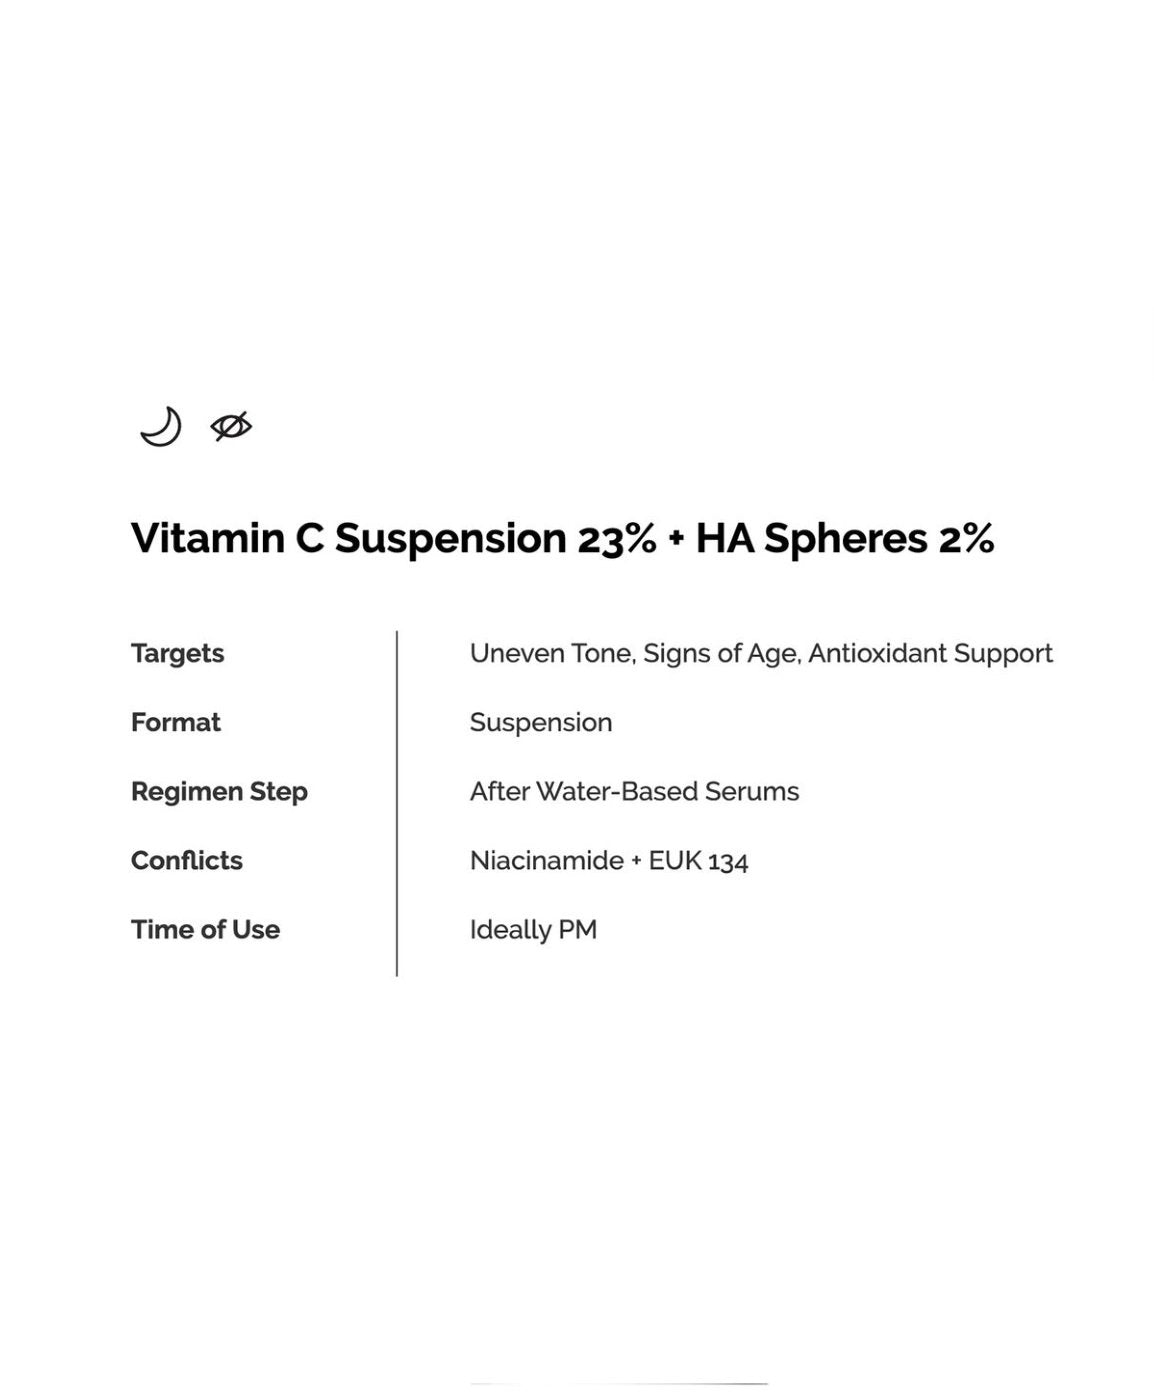 Vitamin C Suspension 23 HA Spheres2 by The Ordinary in UAE, Dubai and Abu Dhabi at Shopey